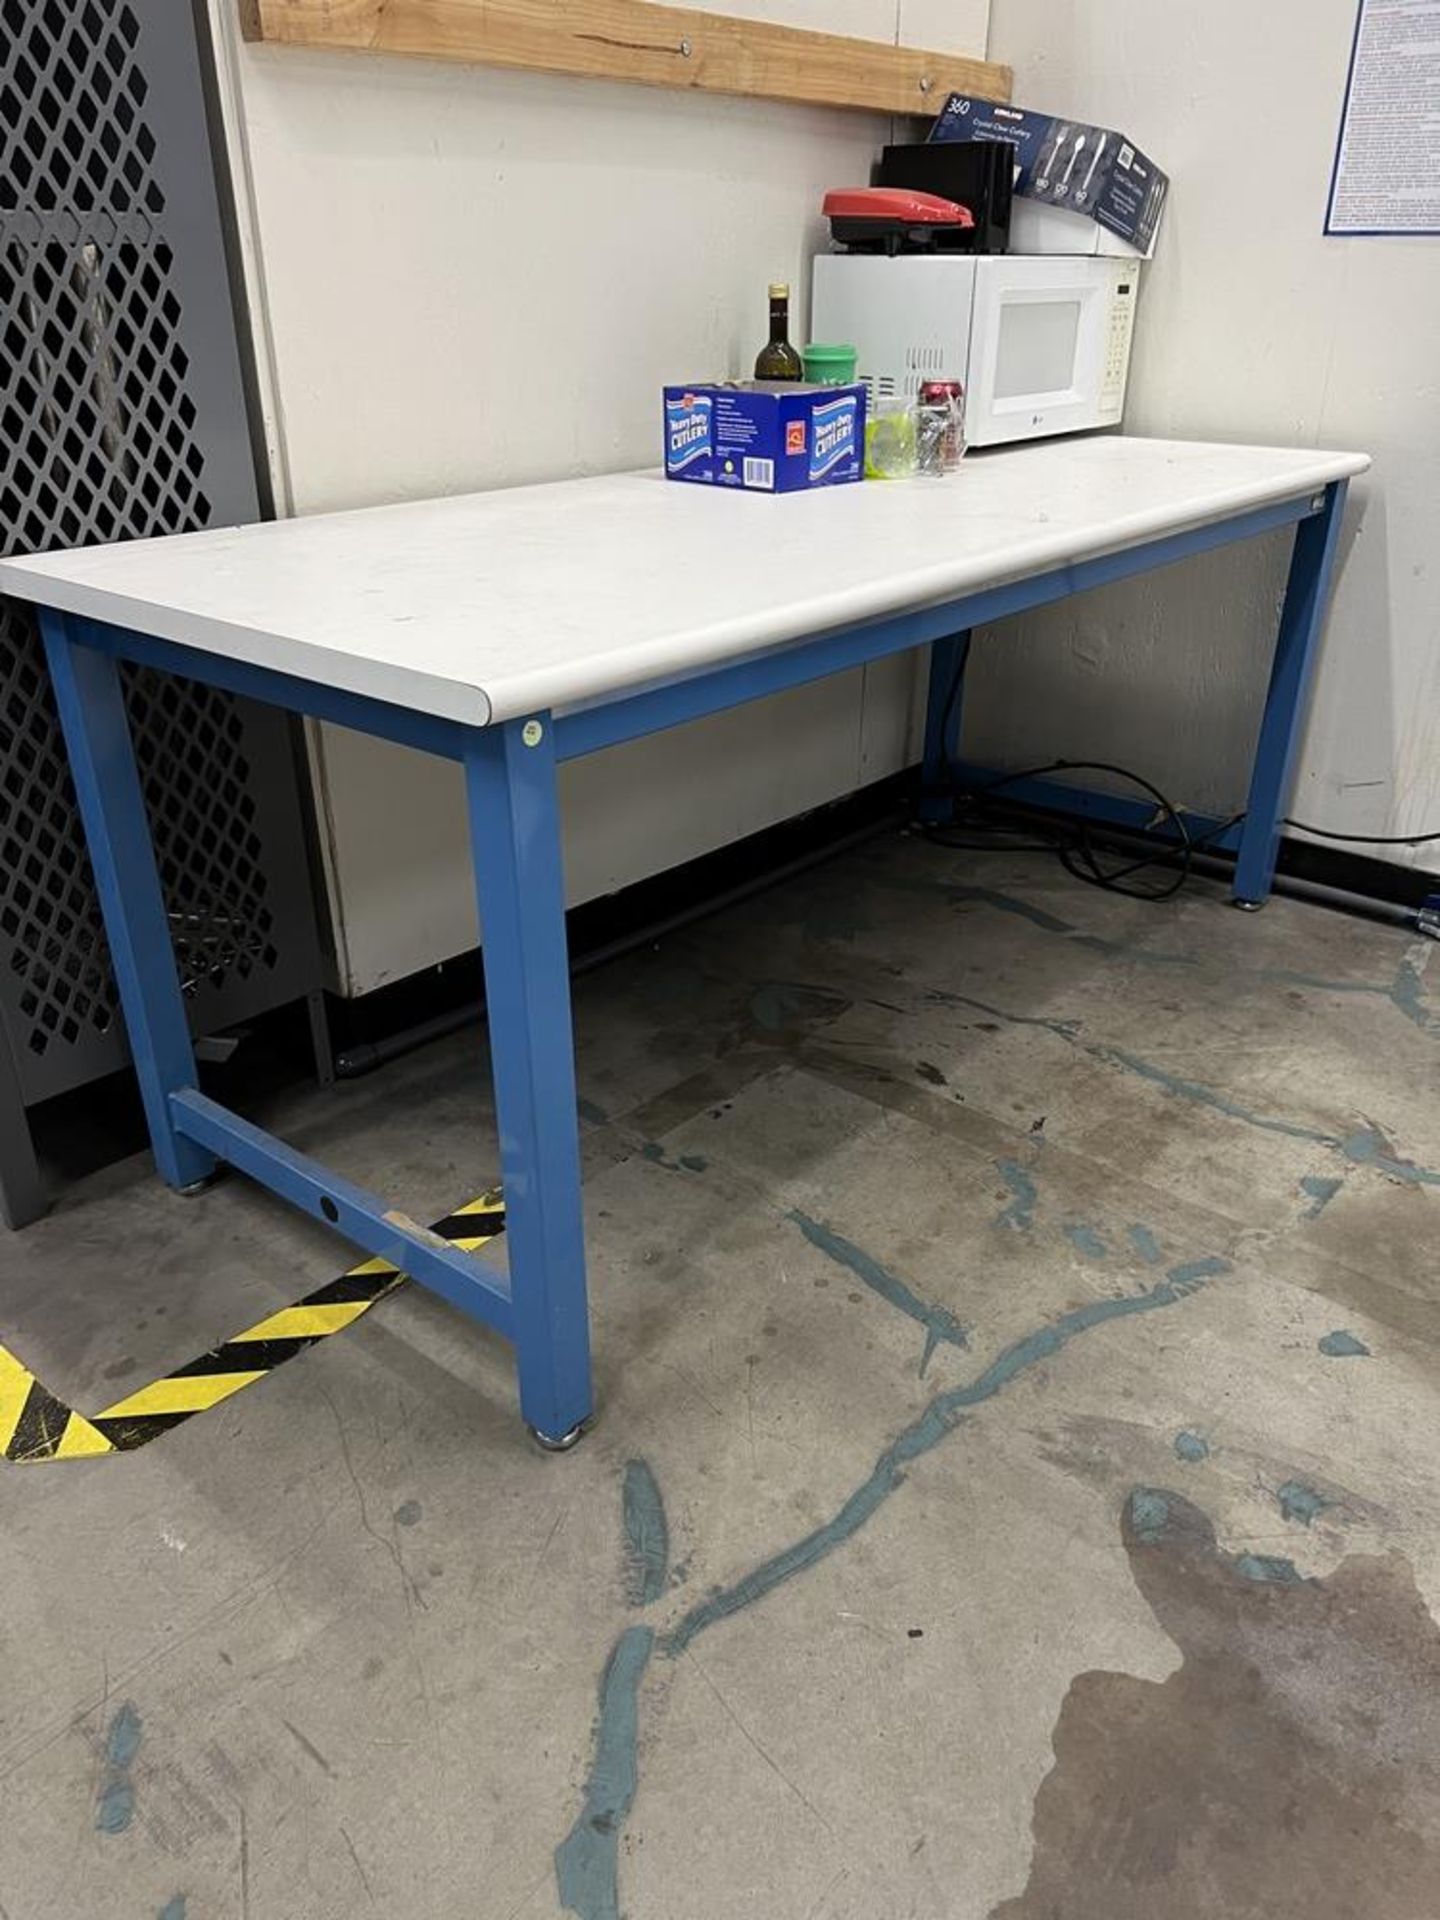 PAC Work Table 72" x 30" x 30" (No Contents)